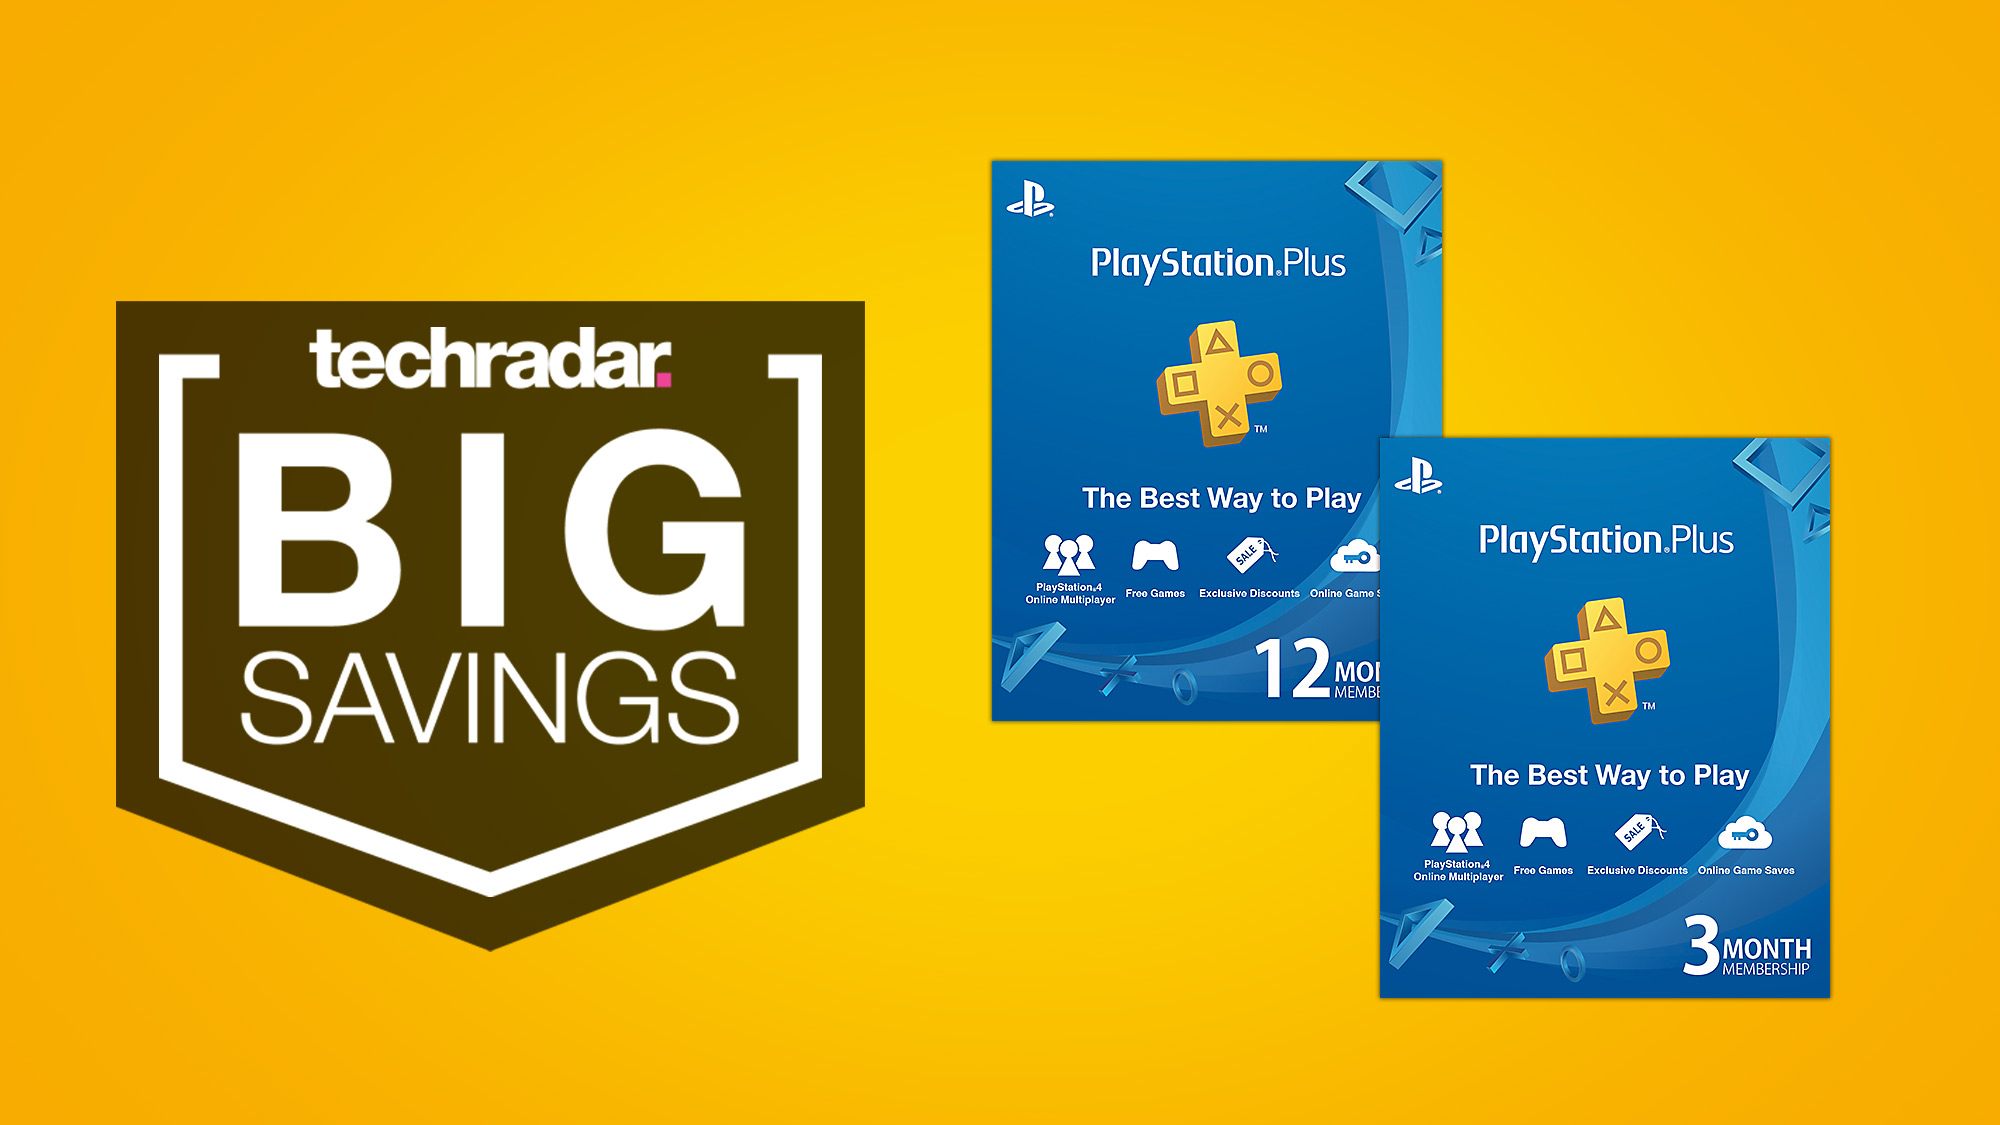 are there any playstation plus deals